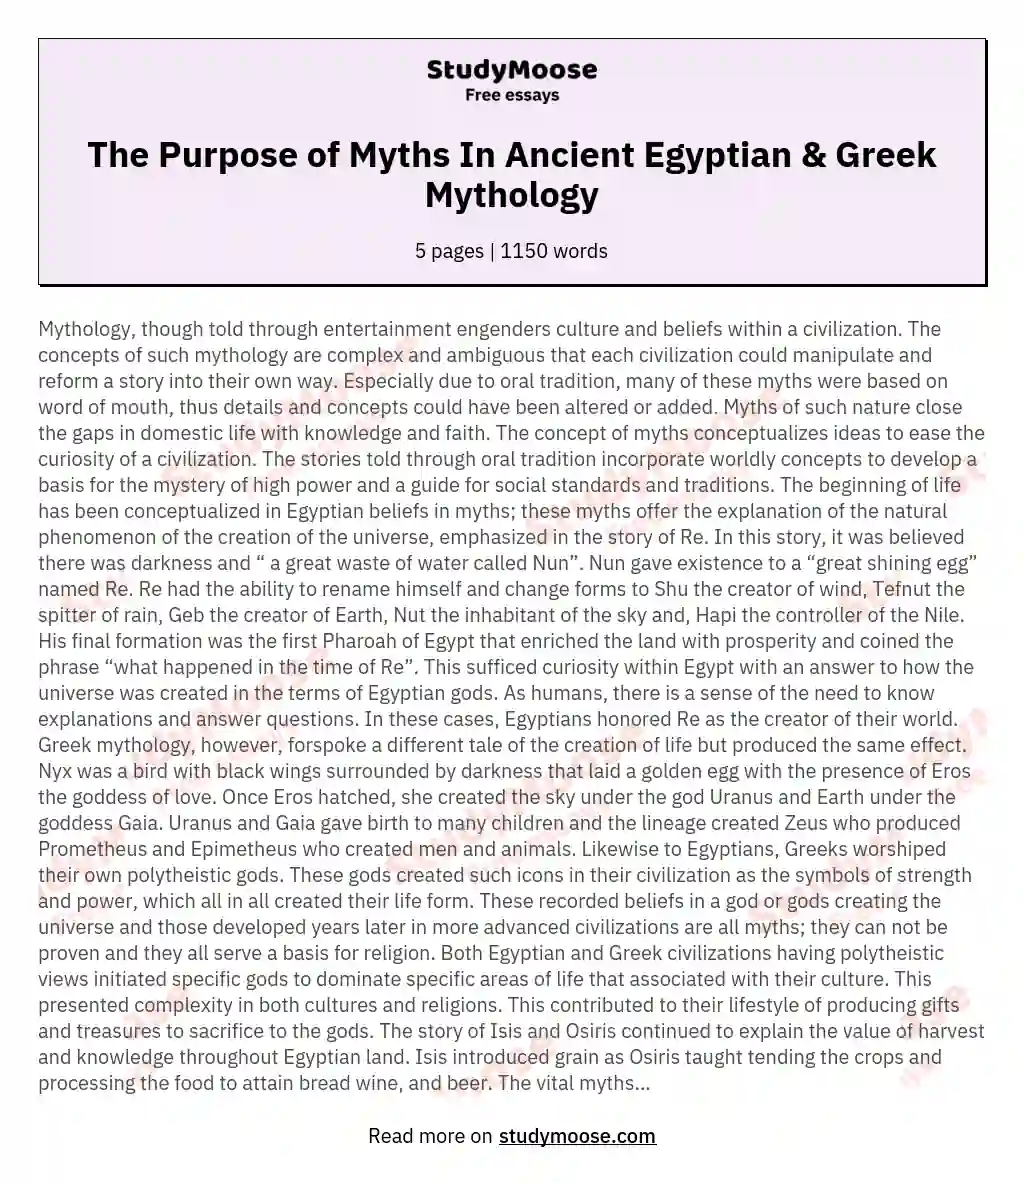 The Purpose of Myths In Ancient Egyptian & Greek Mythology essay